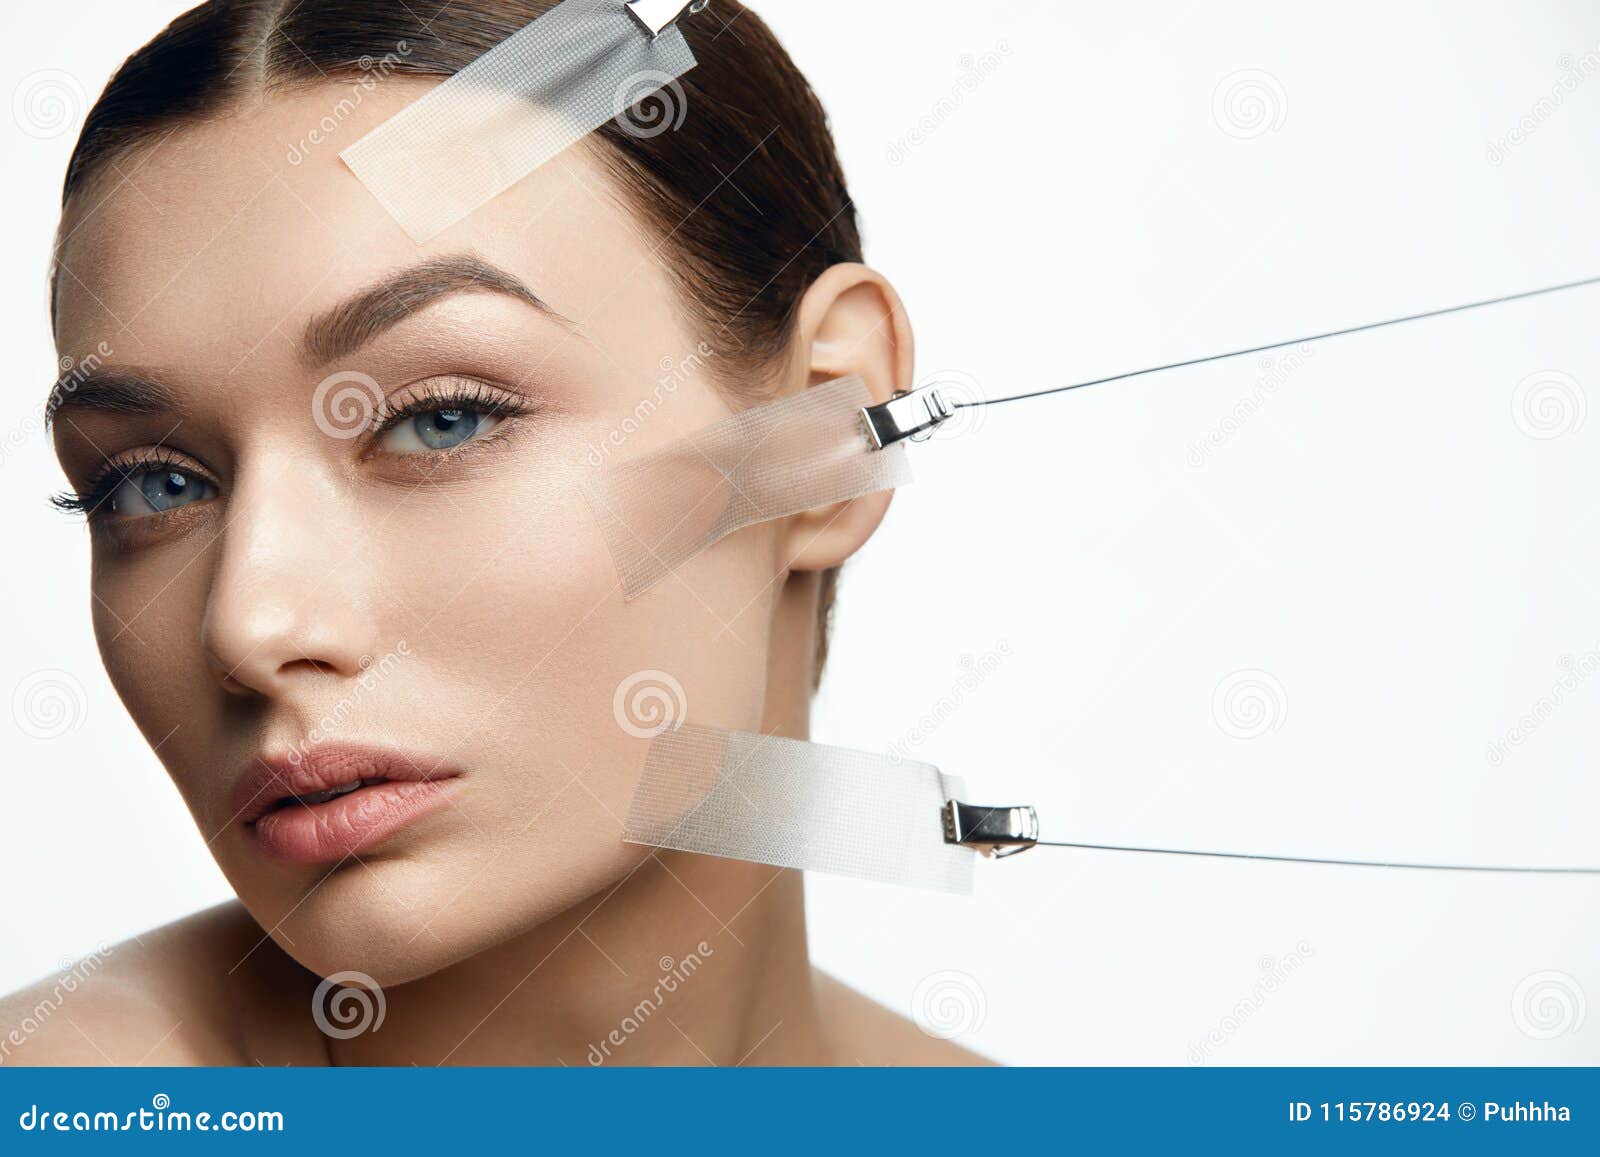 beauty woman face during face skin lift treatment